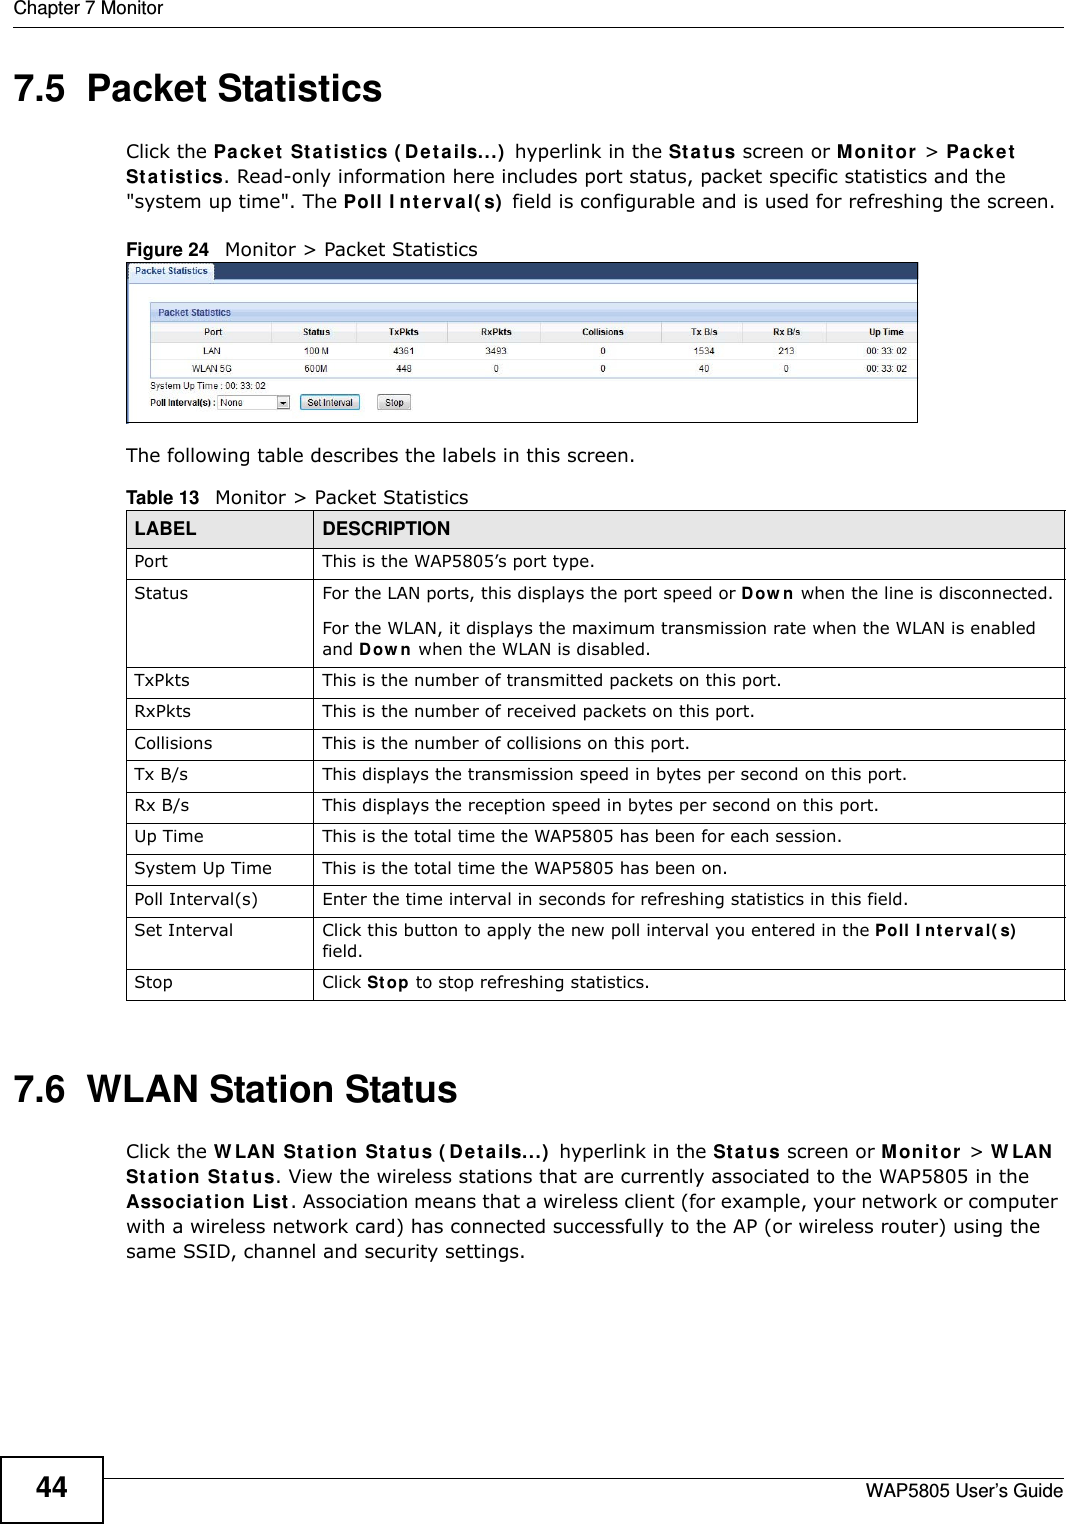 Chapter 7 MonitorWAP5805 User’s Guide447.5  Packet Statistics   Click the Packet Statistics (Details...) hyperlink in the Status screen or Monitor &gt; Packet Statistics. Read-only information here includes port status, packet specific statistics and the &quot;system up time&quot;. The Poll Interval(s) field is configurable and is used for refreshing the screen.Figure 24   Monitor &gt; Packet Statistics The following table describes the labels in this screen. 7.6  WLAN Station Status    Click the WLAN Station Status (Details...) hyperlink in the Status screen or Monitor &gt; WLAN Station Status. View the wireless stations that are currently associated to the WAP5805 in the Association List. Association means that a wireless client (for example, your network or computer with a wireless network card) has connected successfully to the AP (or wireless router) using the same SSID, channel and security settings.Table 13   Monitor &gt; Packet StatisticsLABEL DESCRIPTIONPort This is the WAP5805’s port type.Status  For the LAN ports, this displays the port speed or Down when the line is disconnected.For the WLAN, it displays the maximum transmission rate when the WLAN is enabled and Down when the WLAN is disabled.TxPkts  This is the number of transmitted packets on this port.RxPkts  This is the number of received packets on this port.Collisions  This is the number of collisions on this port.Tx B/s  This displays the transmission speed in bytes per second on this port.Rx B/s This displays the reception speed in bytes per second on this port.Up Time This is the total time the WAP5805 has been for each session.System Up Time This is the total time the WAP5805 has been on.Poll Interval(s) Enter the time interval in seconds for refreshing statistics in this field.Set Interval Click this button to apply the new poll interval you entered in the Poll Interval(s) field.Stop Click Stop to stop refreshing statistics.